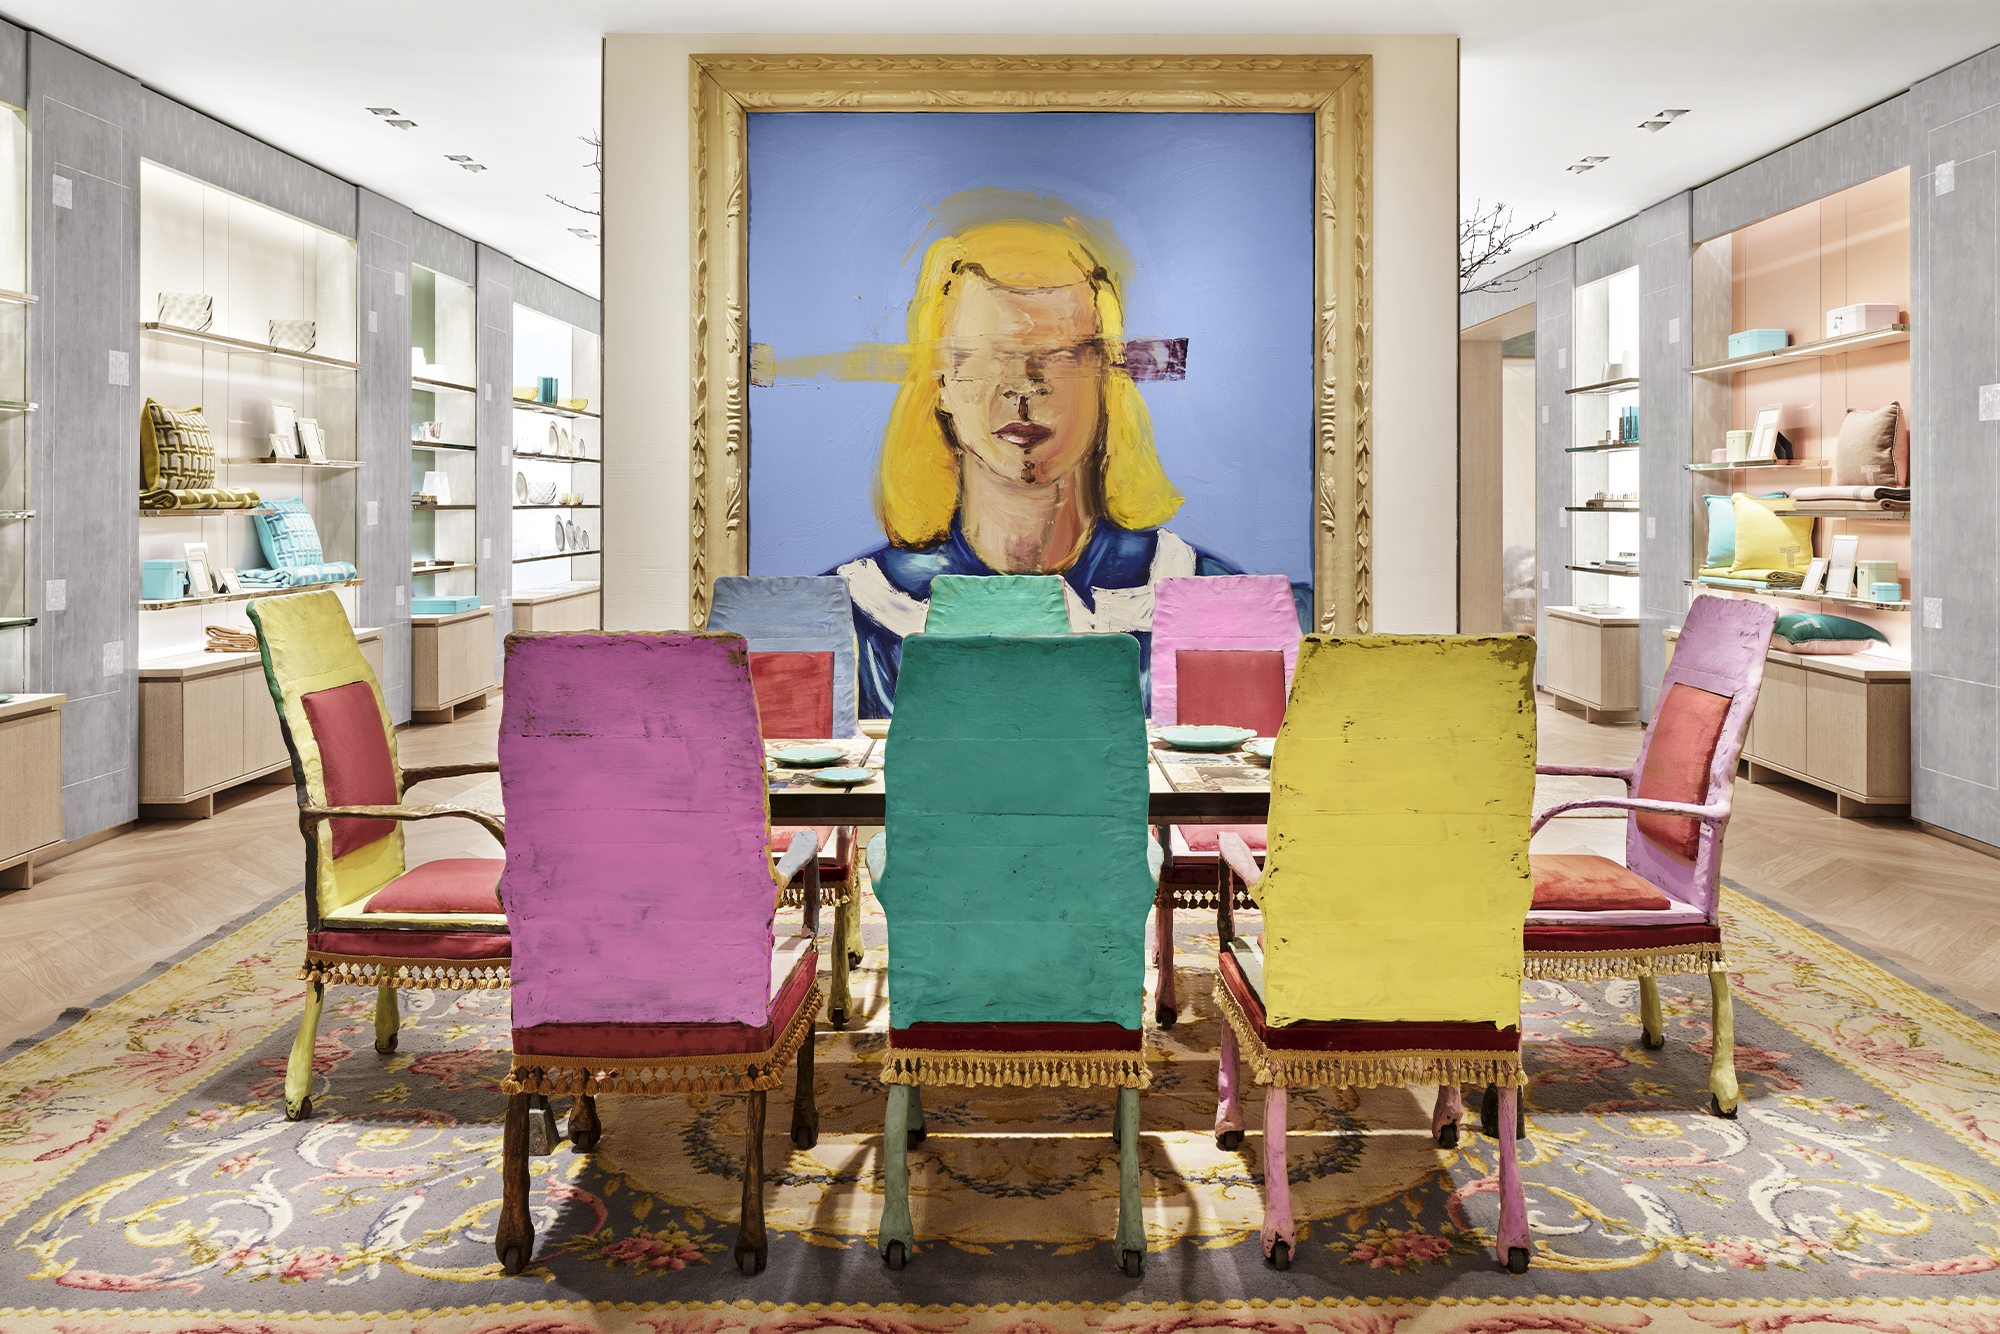 Tiffany & Co. The Landmark interior pink, teal, and yellow chairs in front of a painting